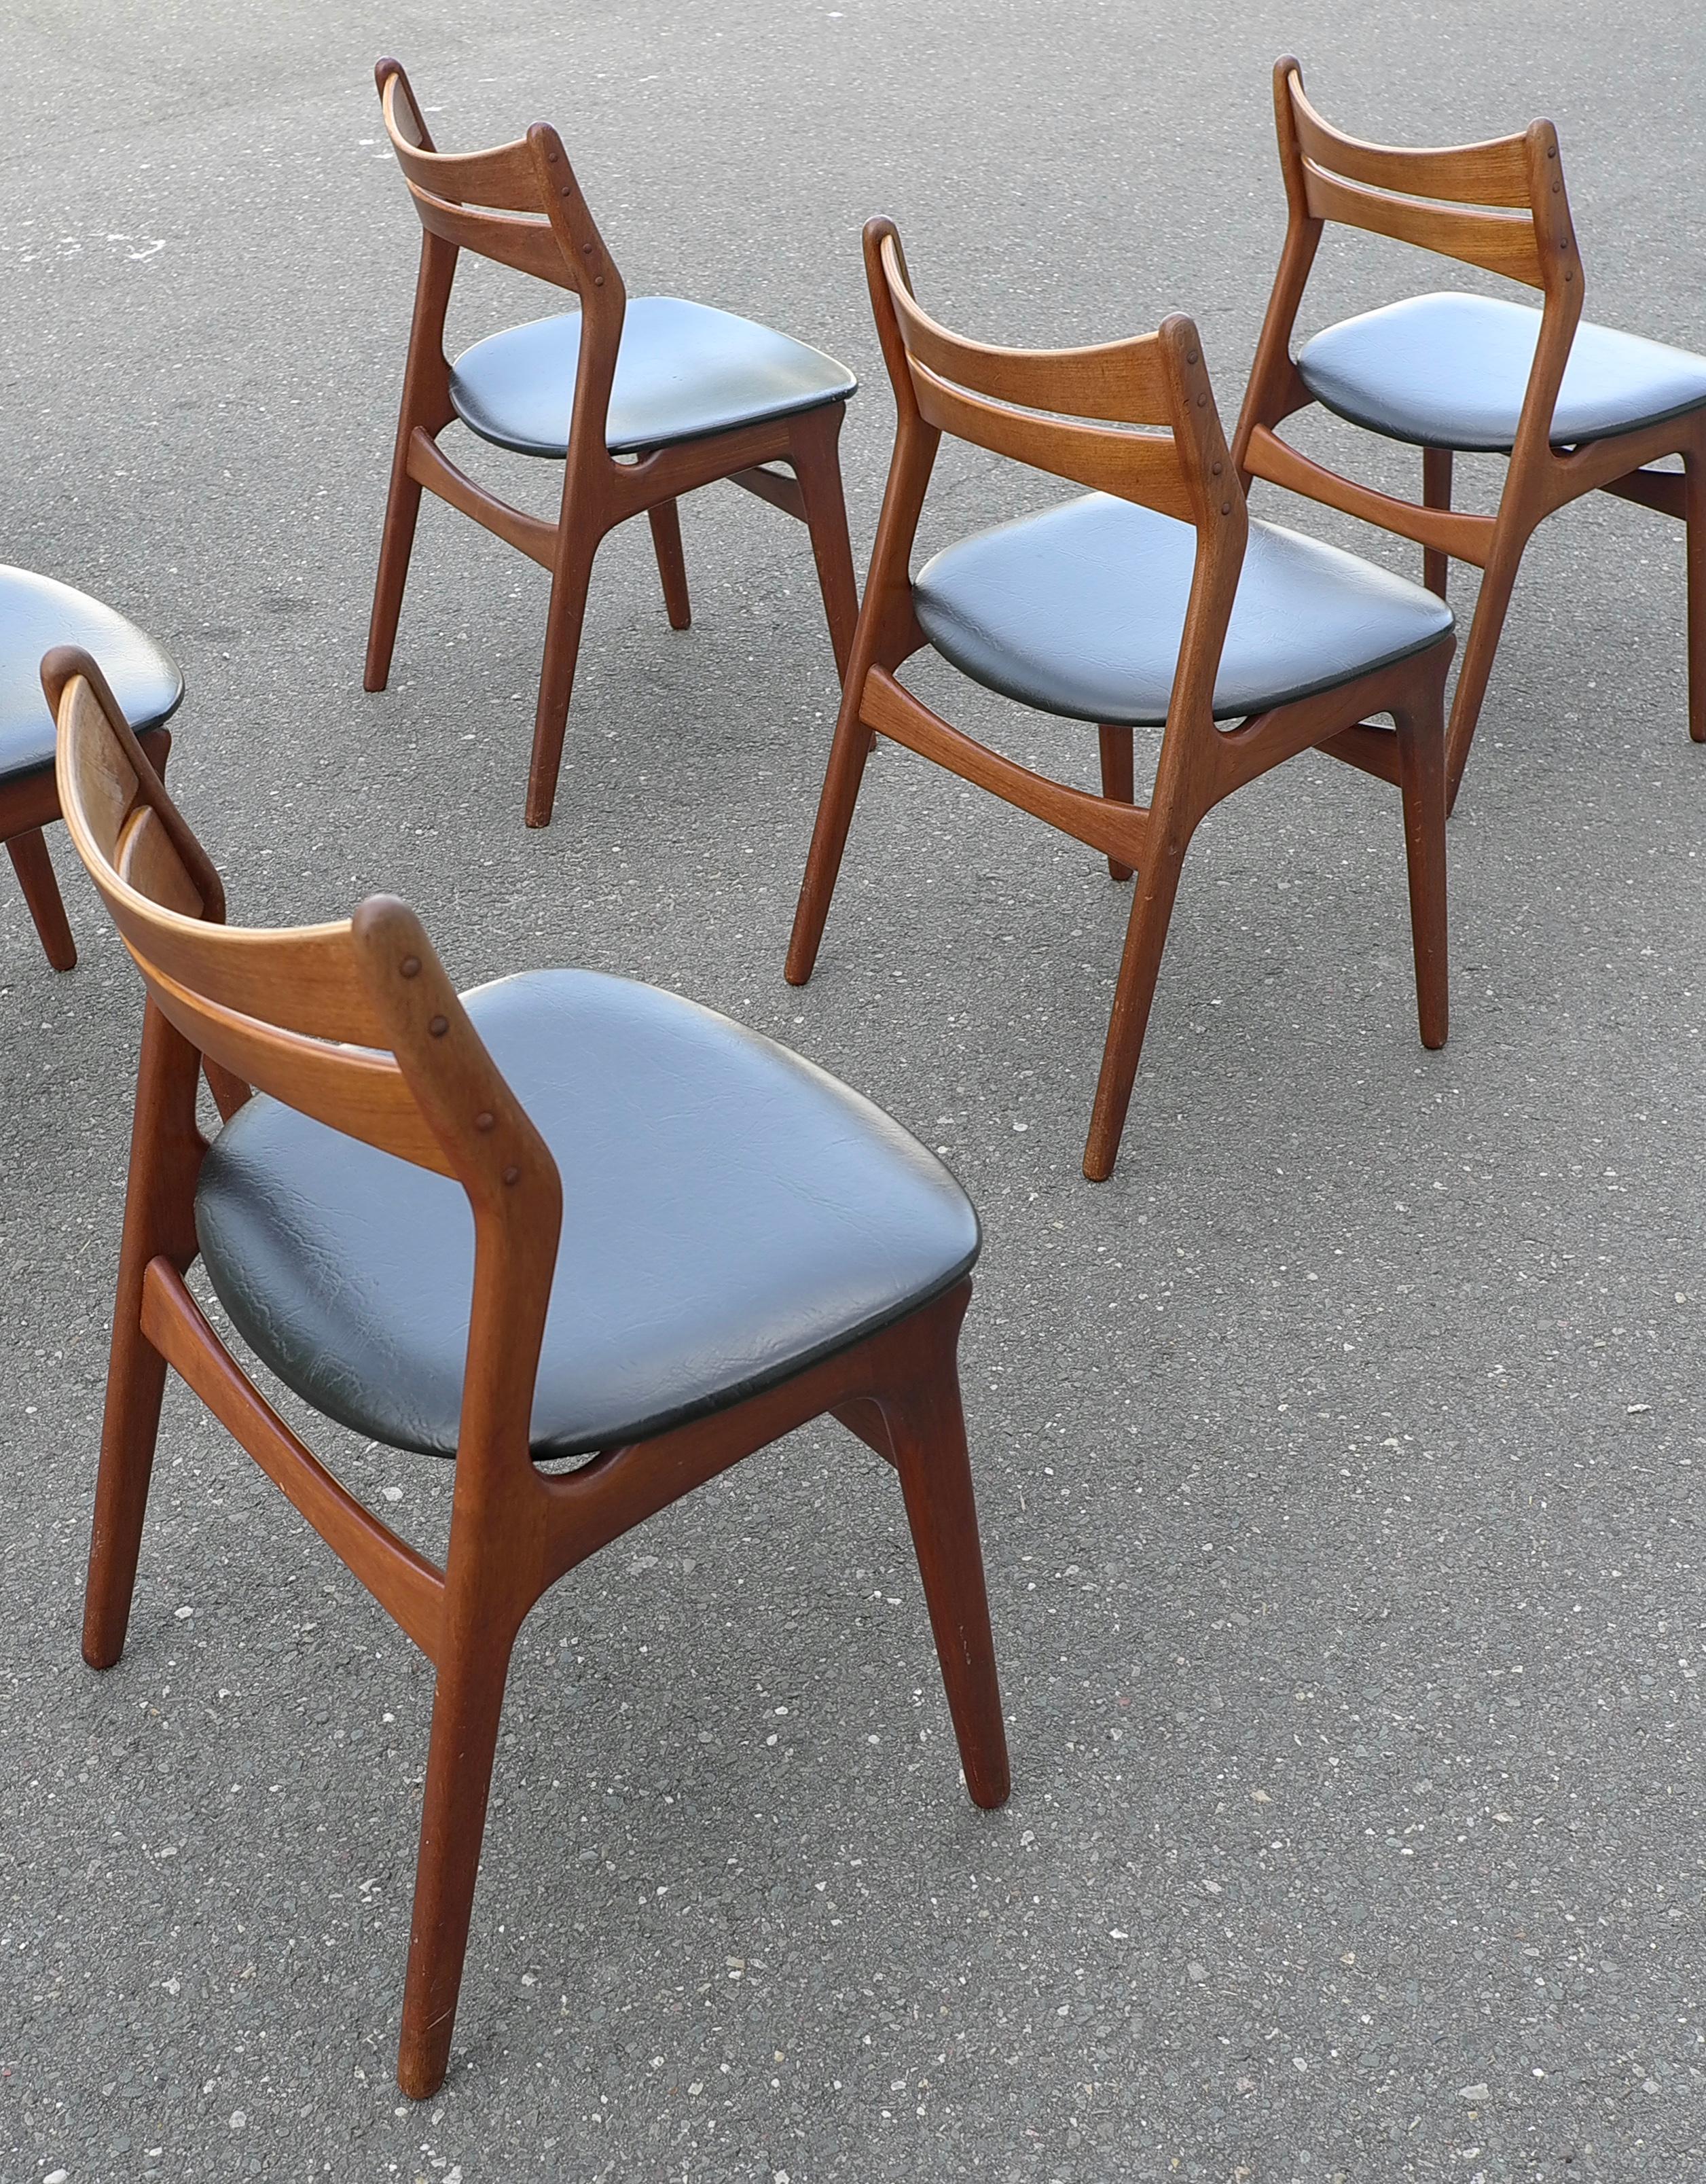 Six Erick Buch teak chairs by CHR Christensens Mobelfabrik, Denmark, 1960.

Six of these more are available but they need new upholstery. That would make it possible to create a large set of 12.